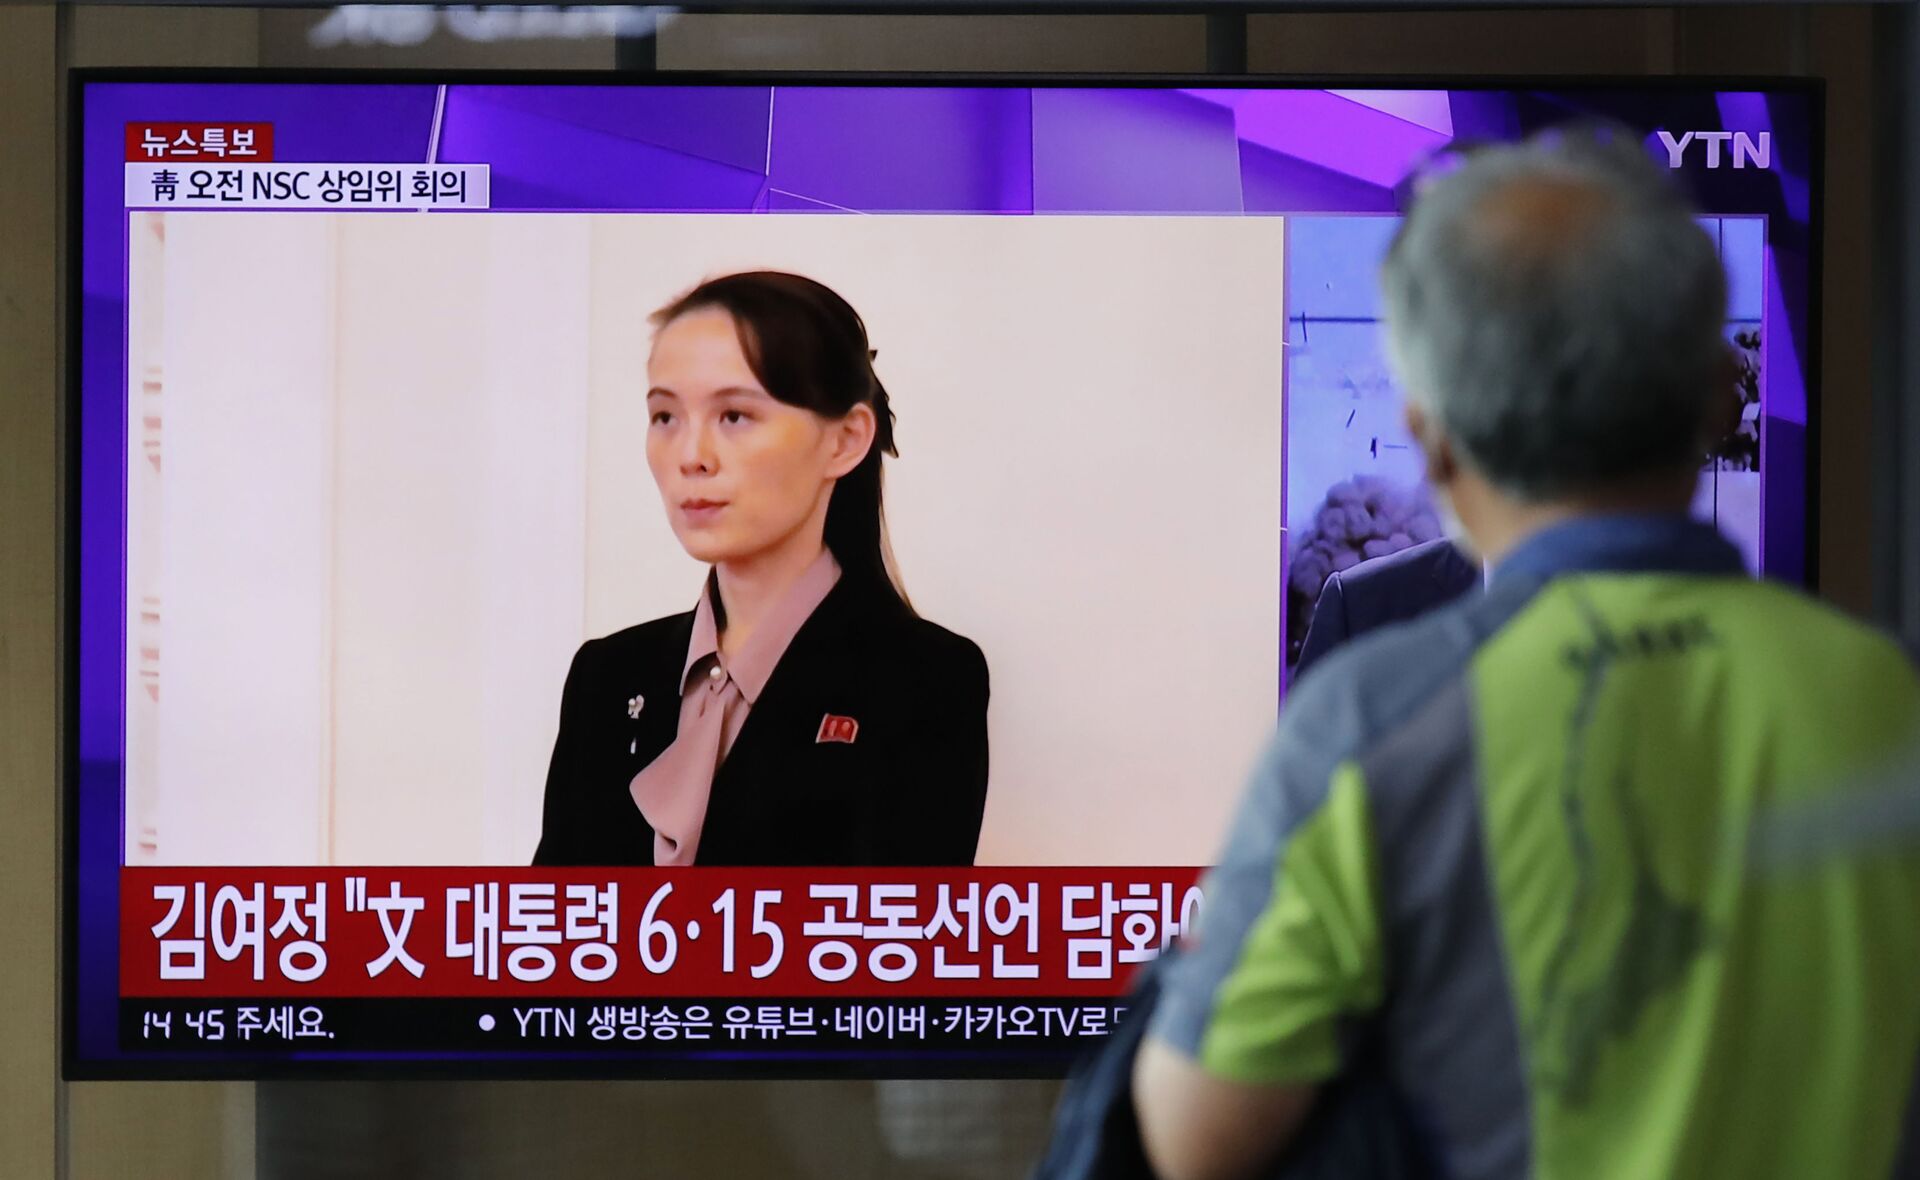 A man watches a TV screen showing a news program with a file image of Kim Yo Jong, the sister of North Korea's leader Kim Jong Un, at the Seoul Railway Station in Seoul, South Korea, Wednesday, June 17, 2020.  - Sputnik International, 1920, 07.09.2021